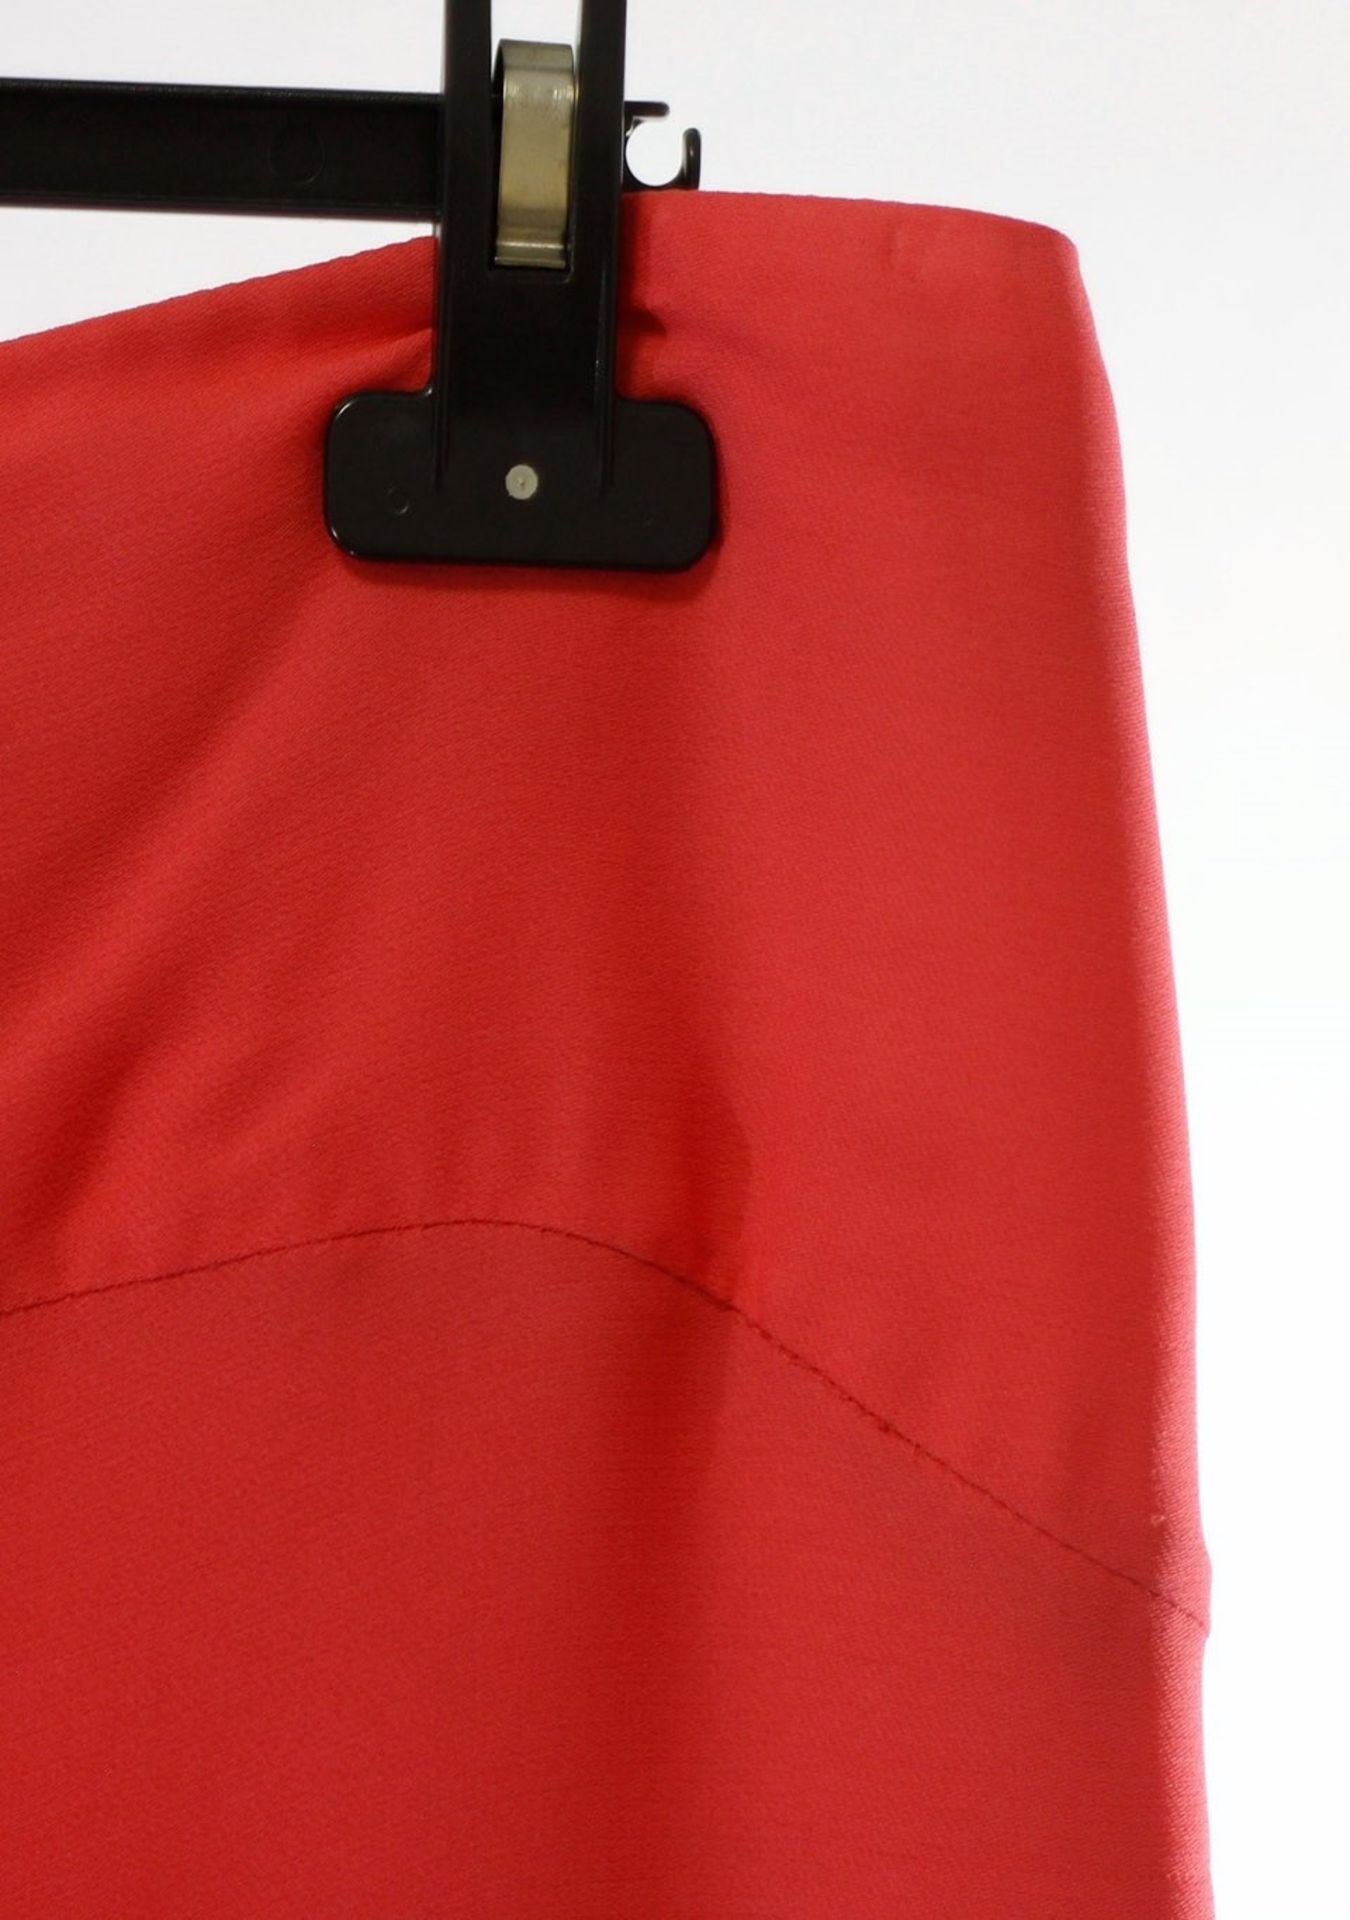 1 x Valentino Fuscia Skirt - Size: 20 - Material: 55% Acetate, 30% Nylon, 15% Silk - From a High End - Image 5 of 5